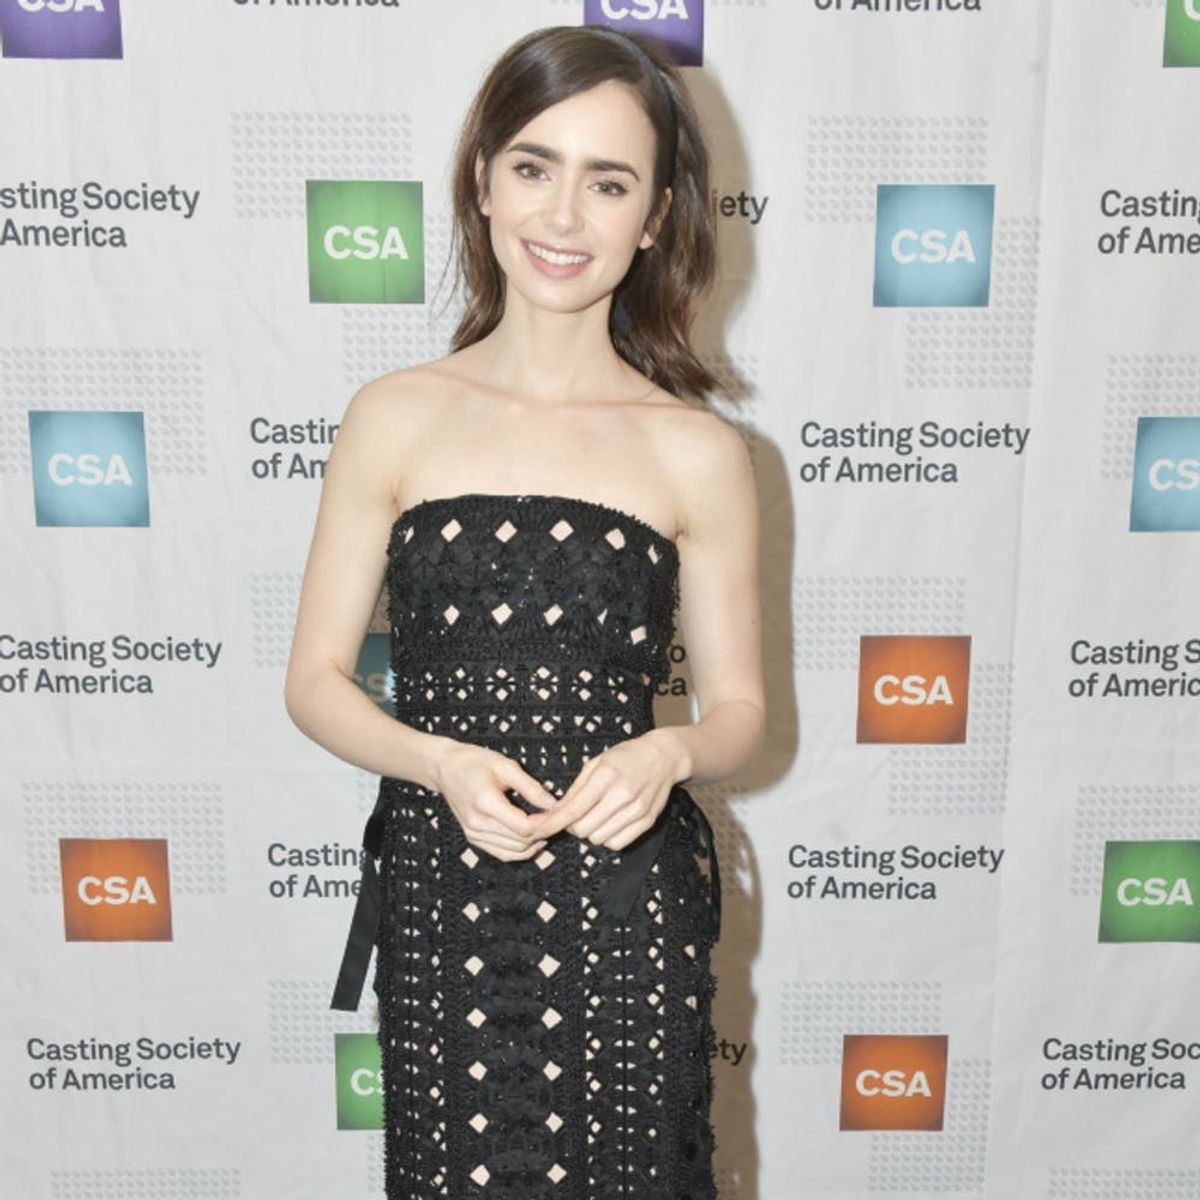 Lily Collins Is Bravely Sharing Her Struggle With an Eating Disorder